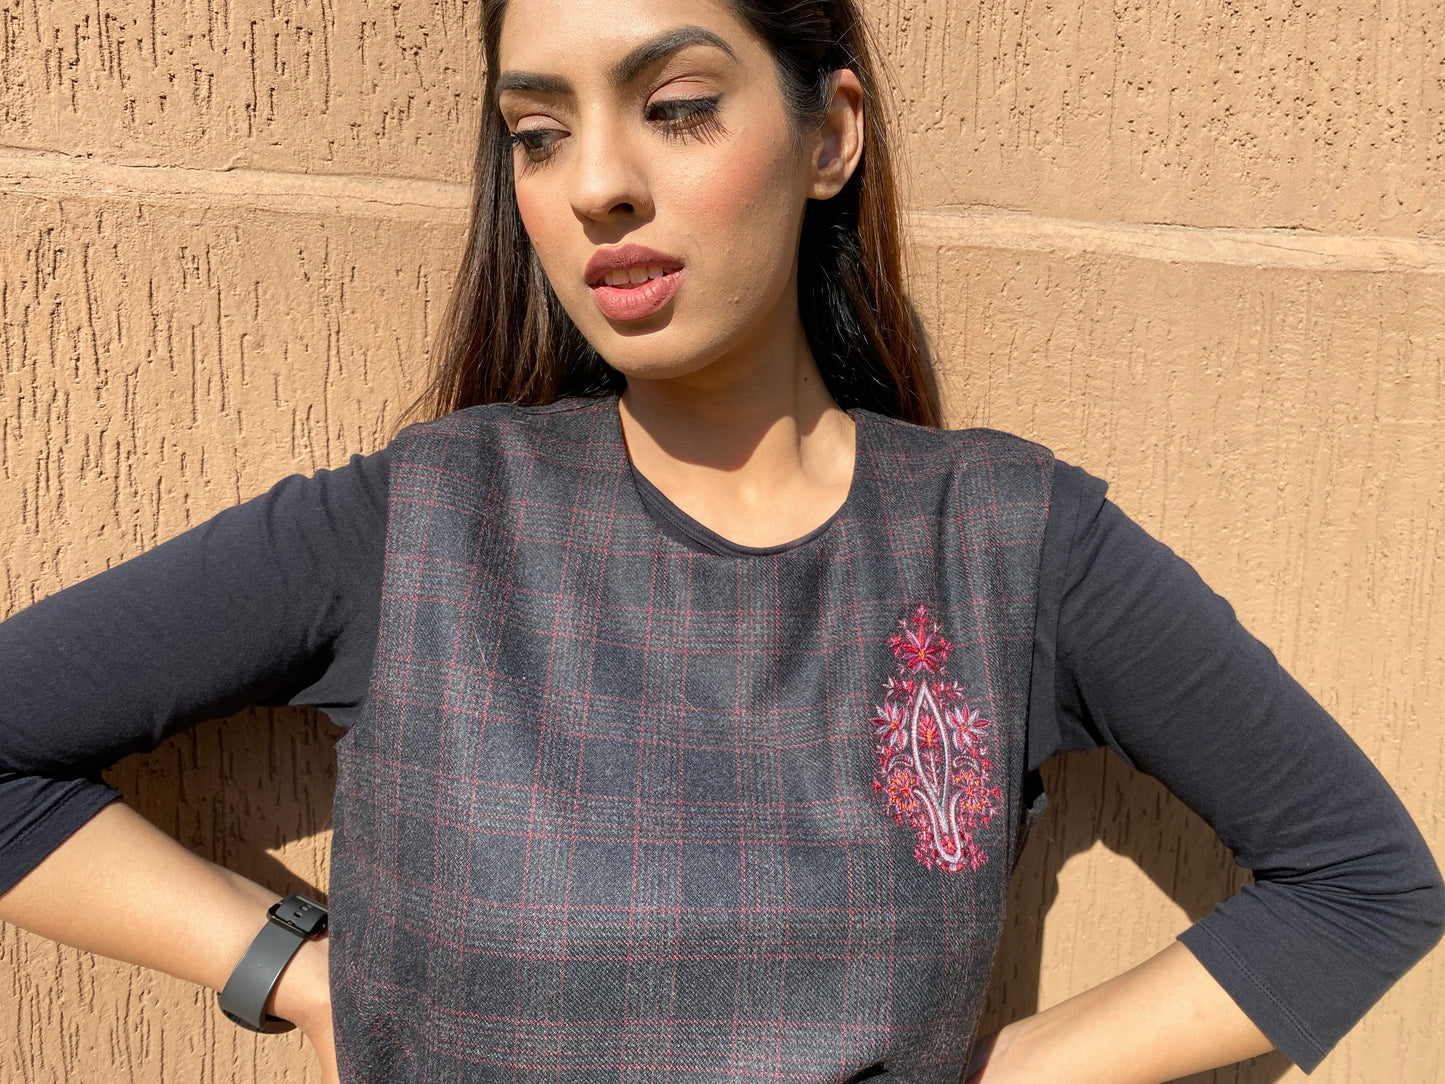 Begonia Top. Plaid pink & black tweed with hand-embroidery